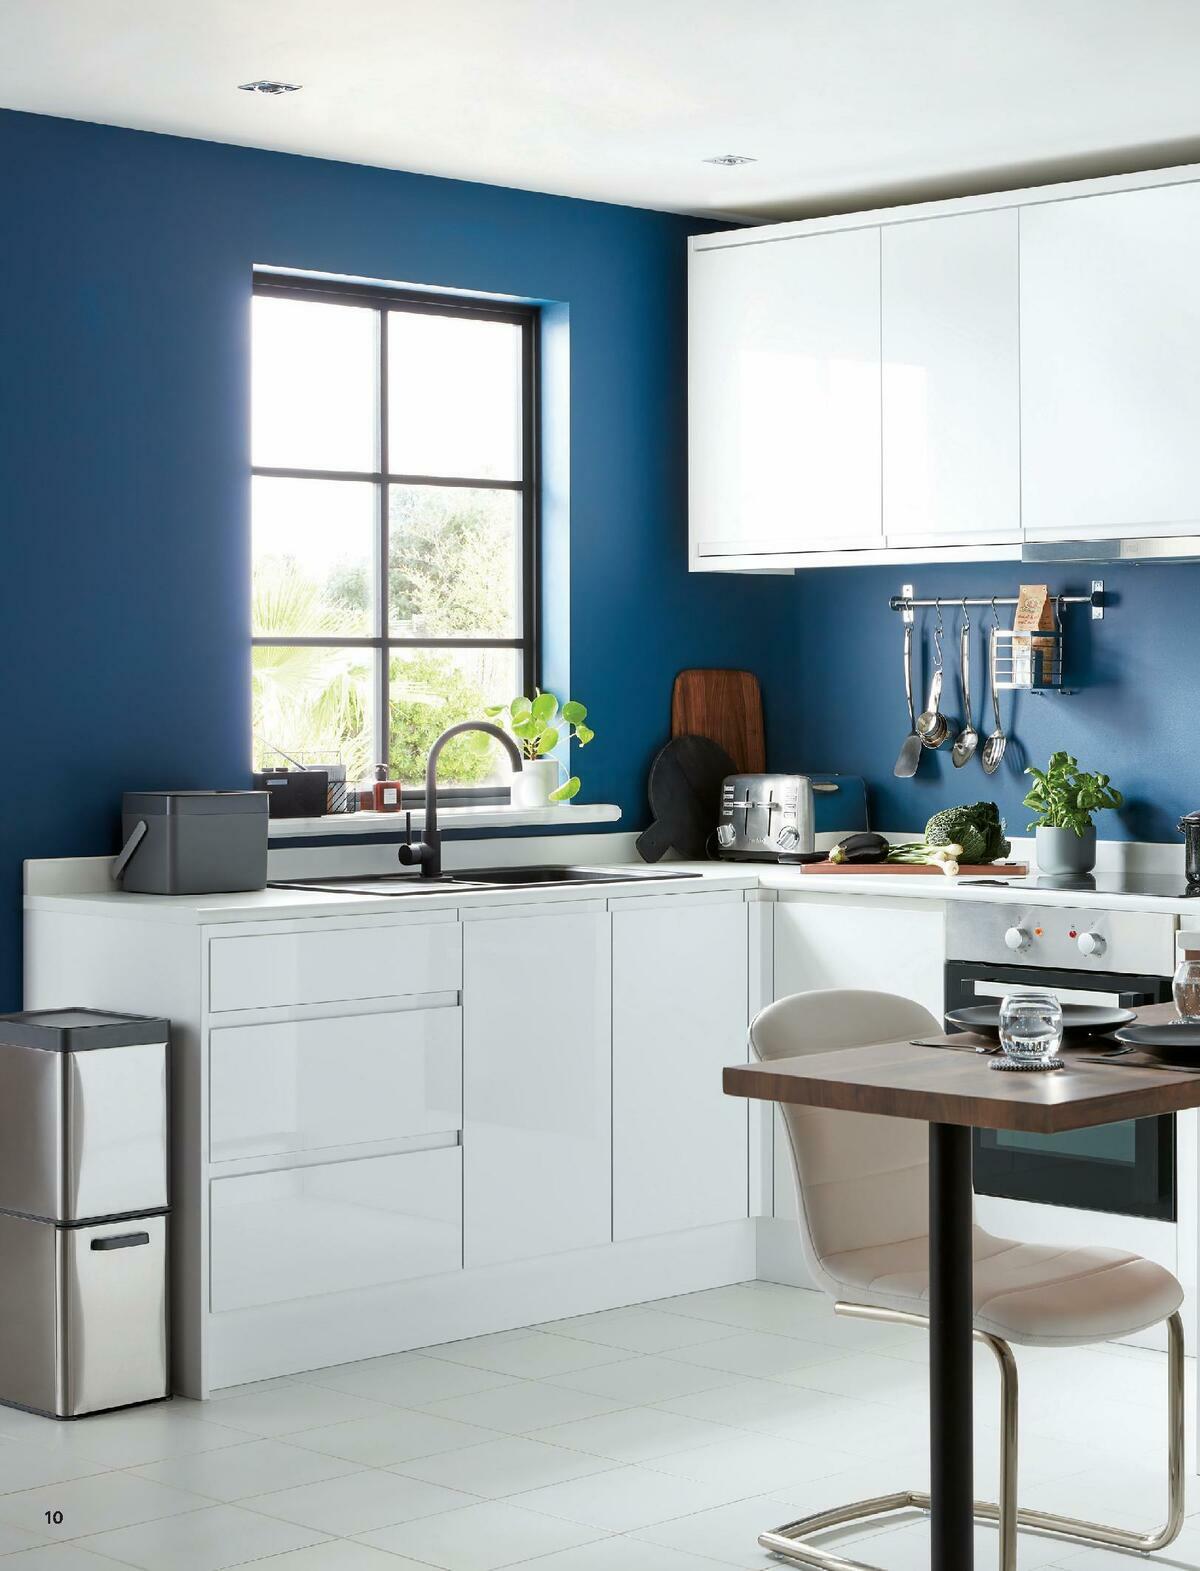 B&Q Kitchens Inspiration Offers & Special Buys for June 1 - Page 10